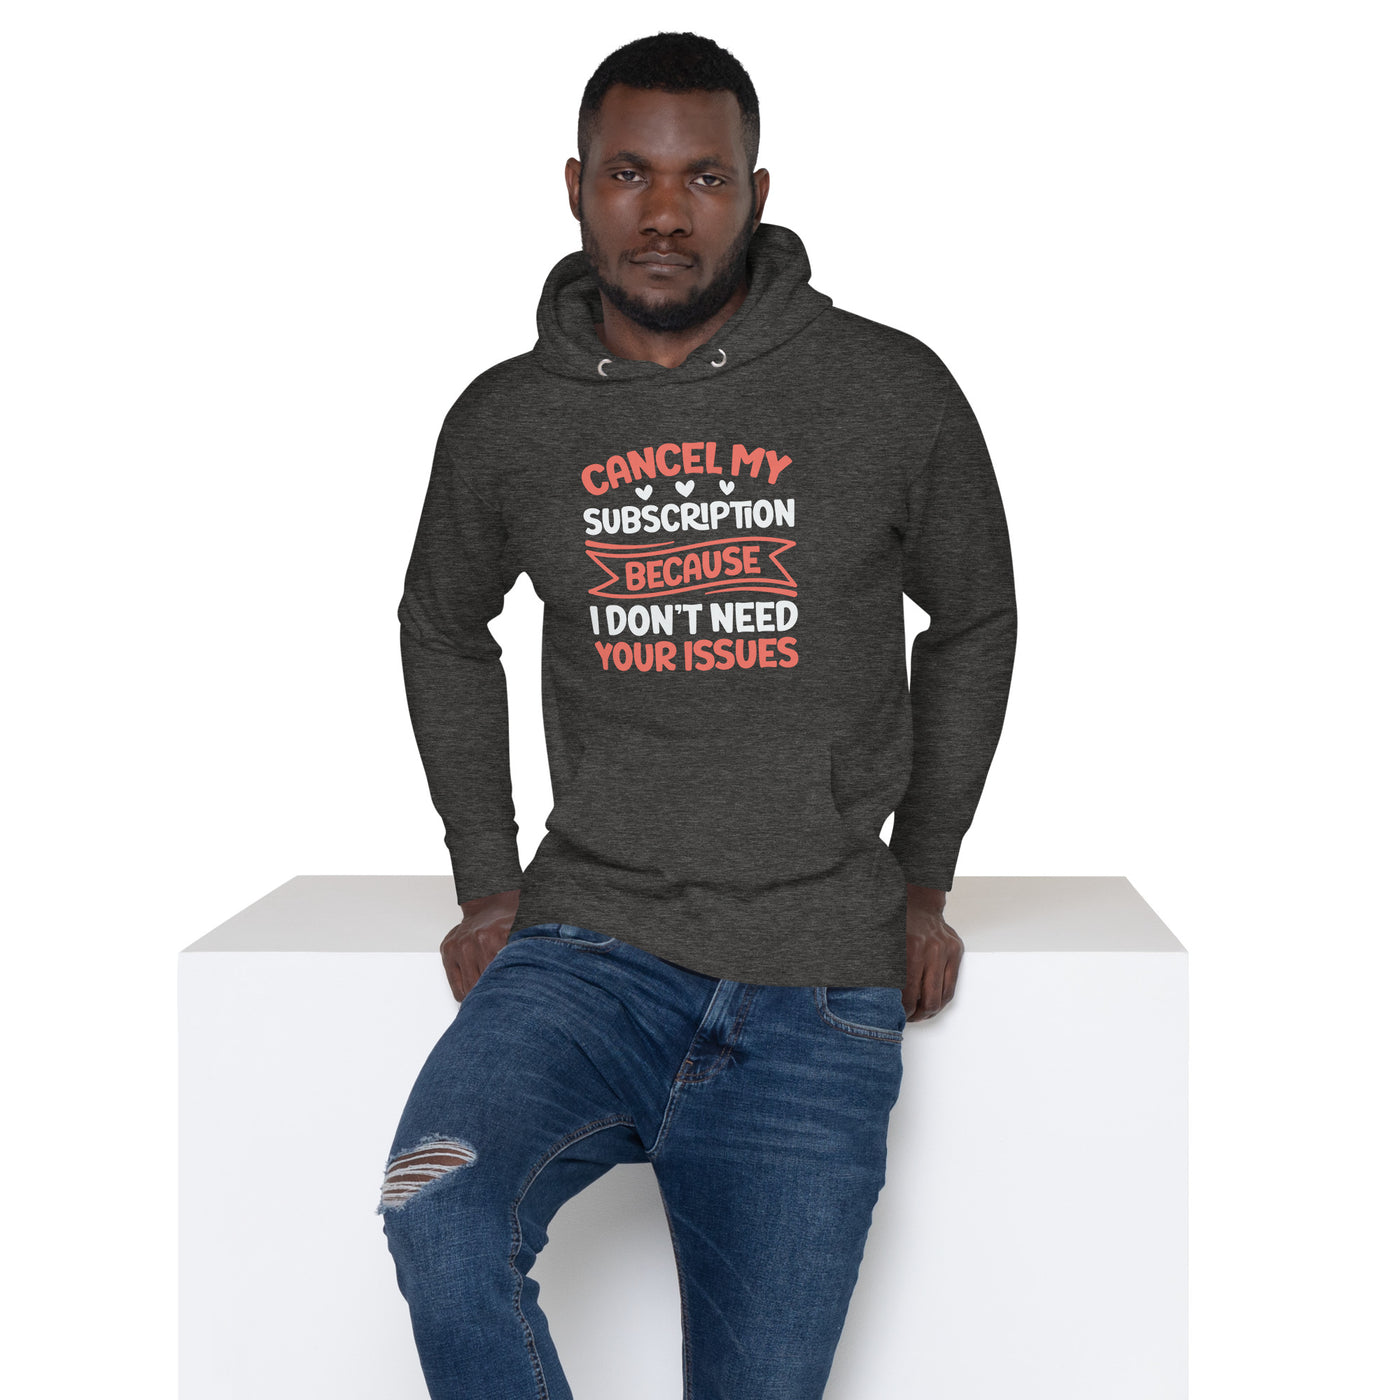 Cancel my subscriptions, I don't Need your issues - Unisex Hoodie